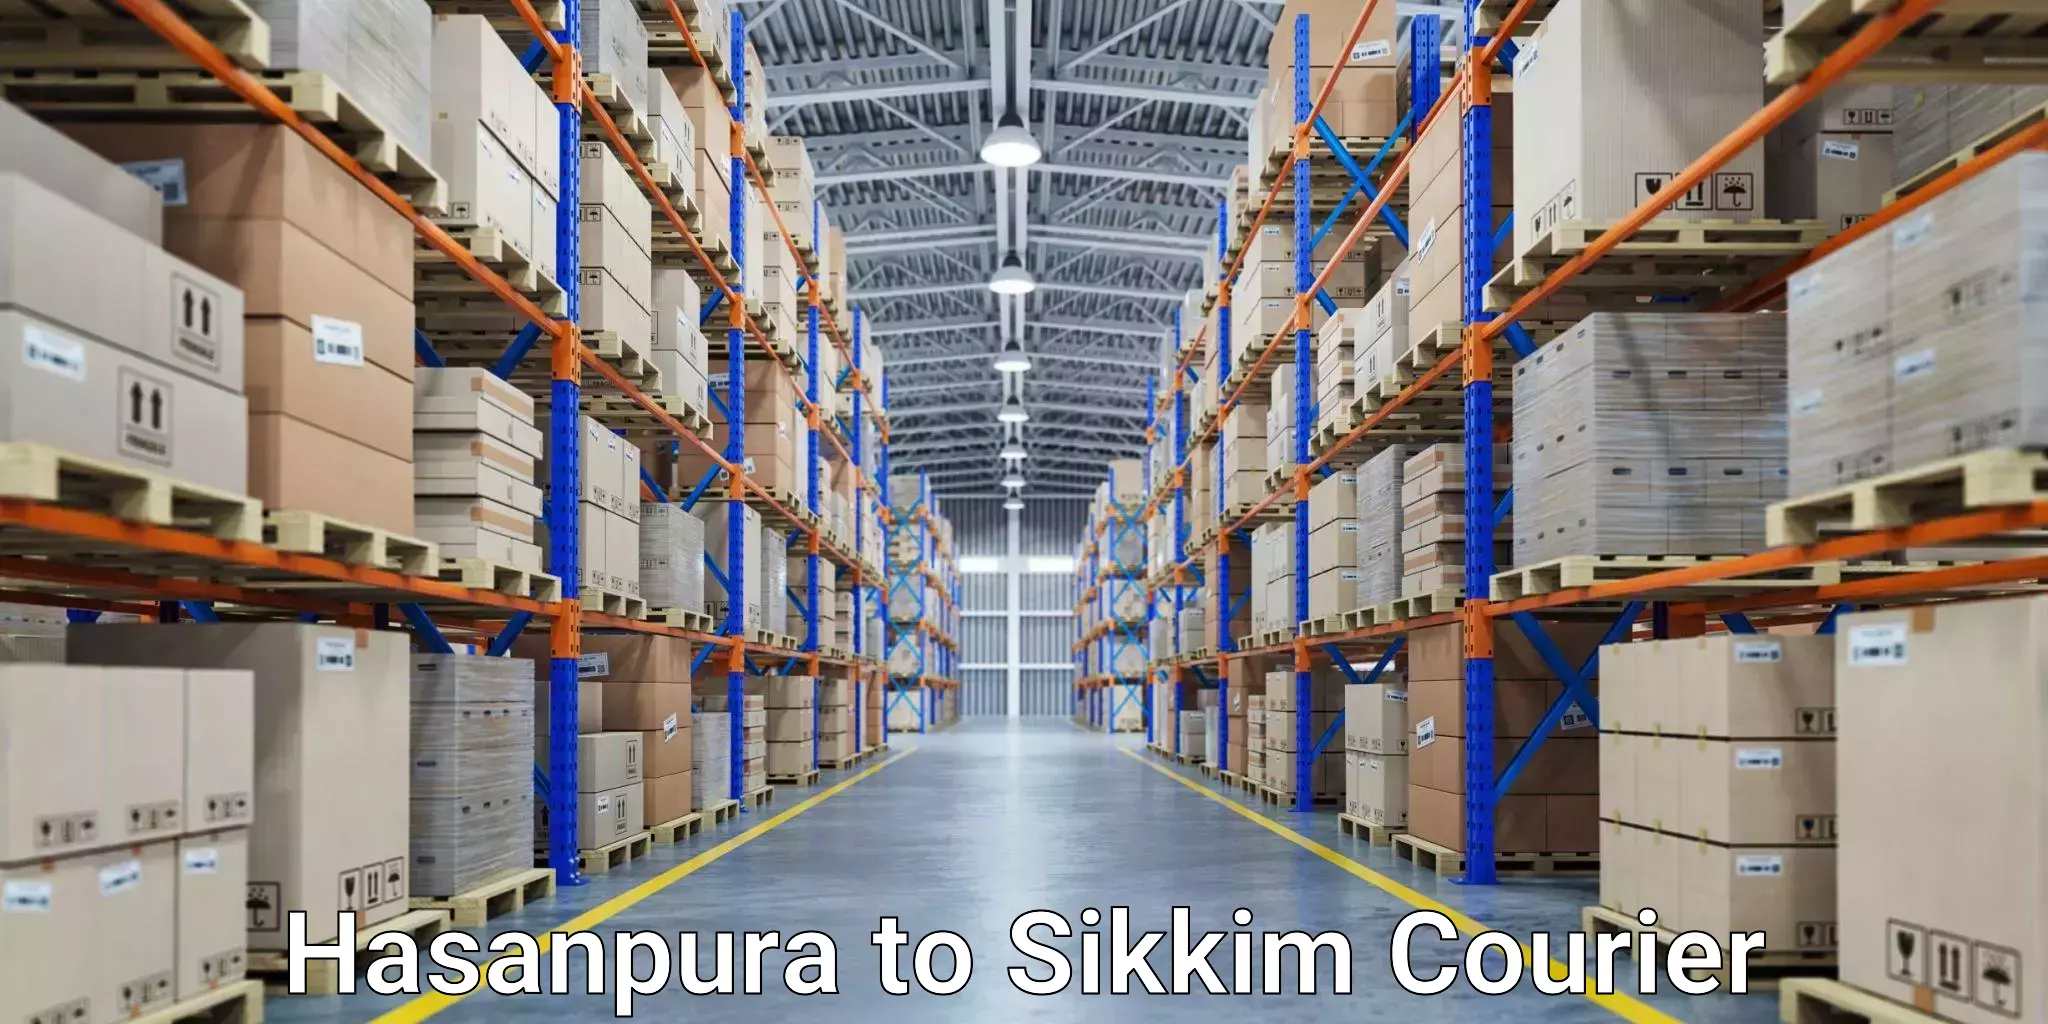 Business shipping needs Hasanpura to Pelling